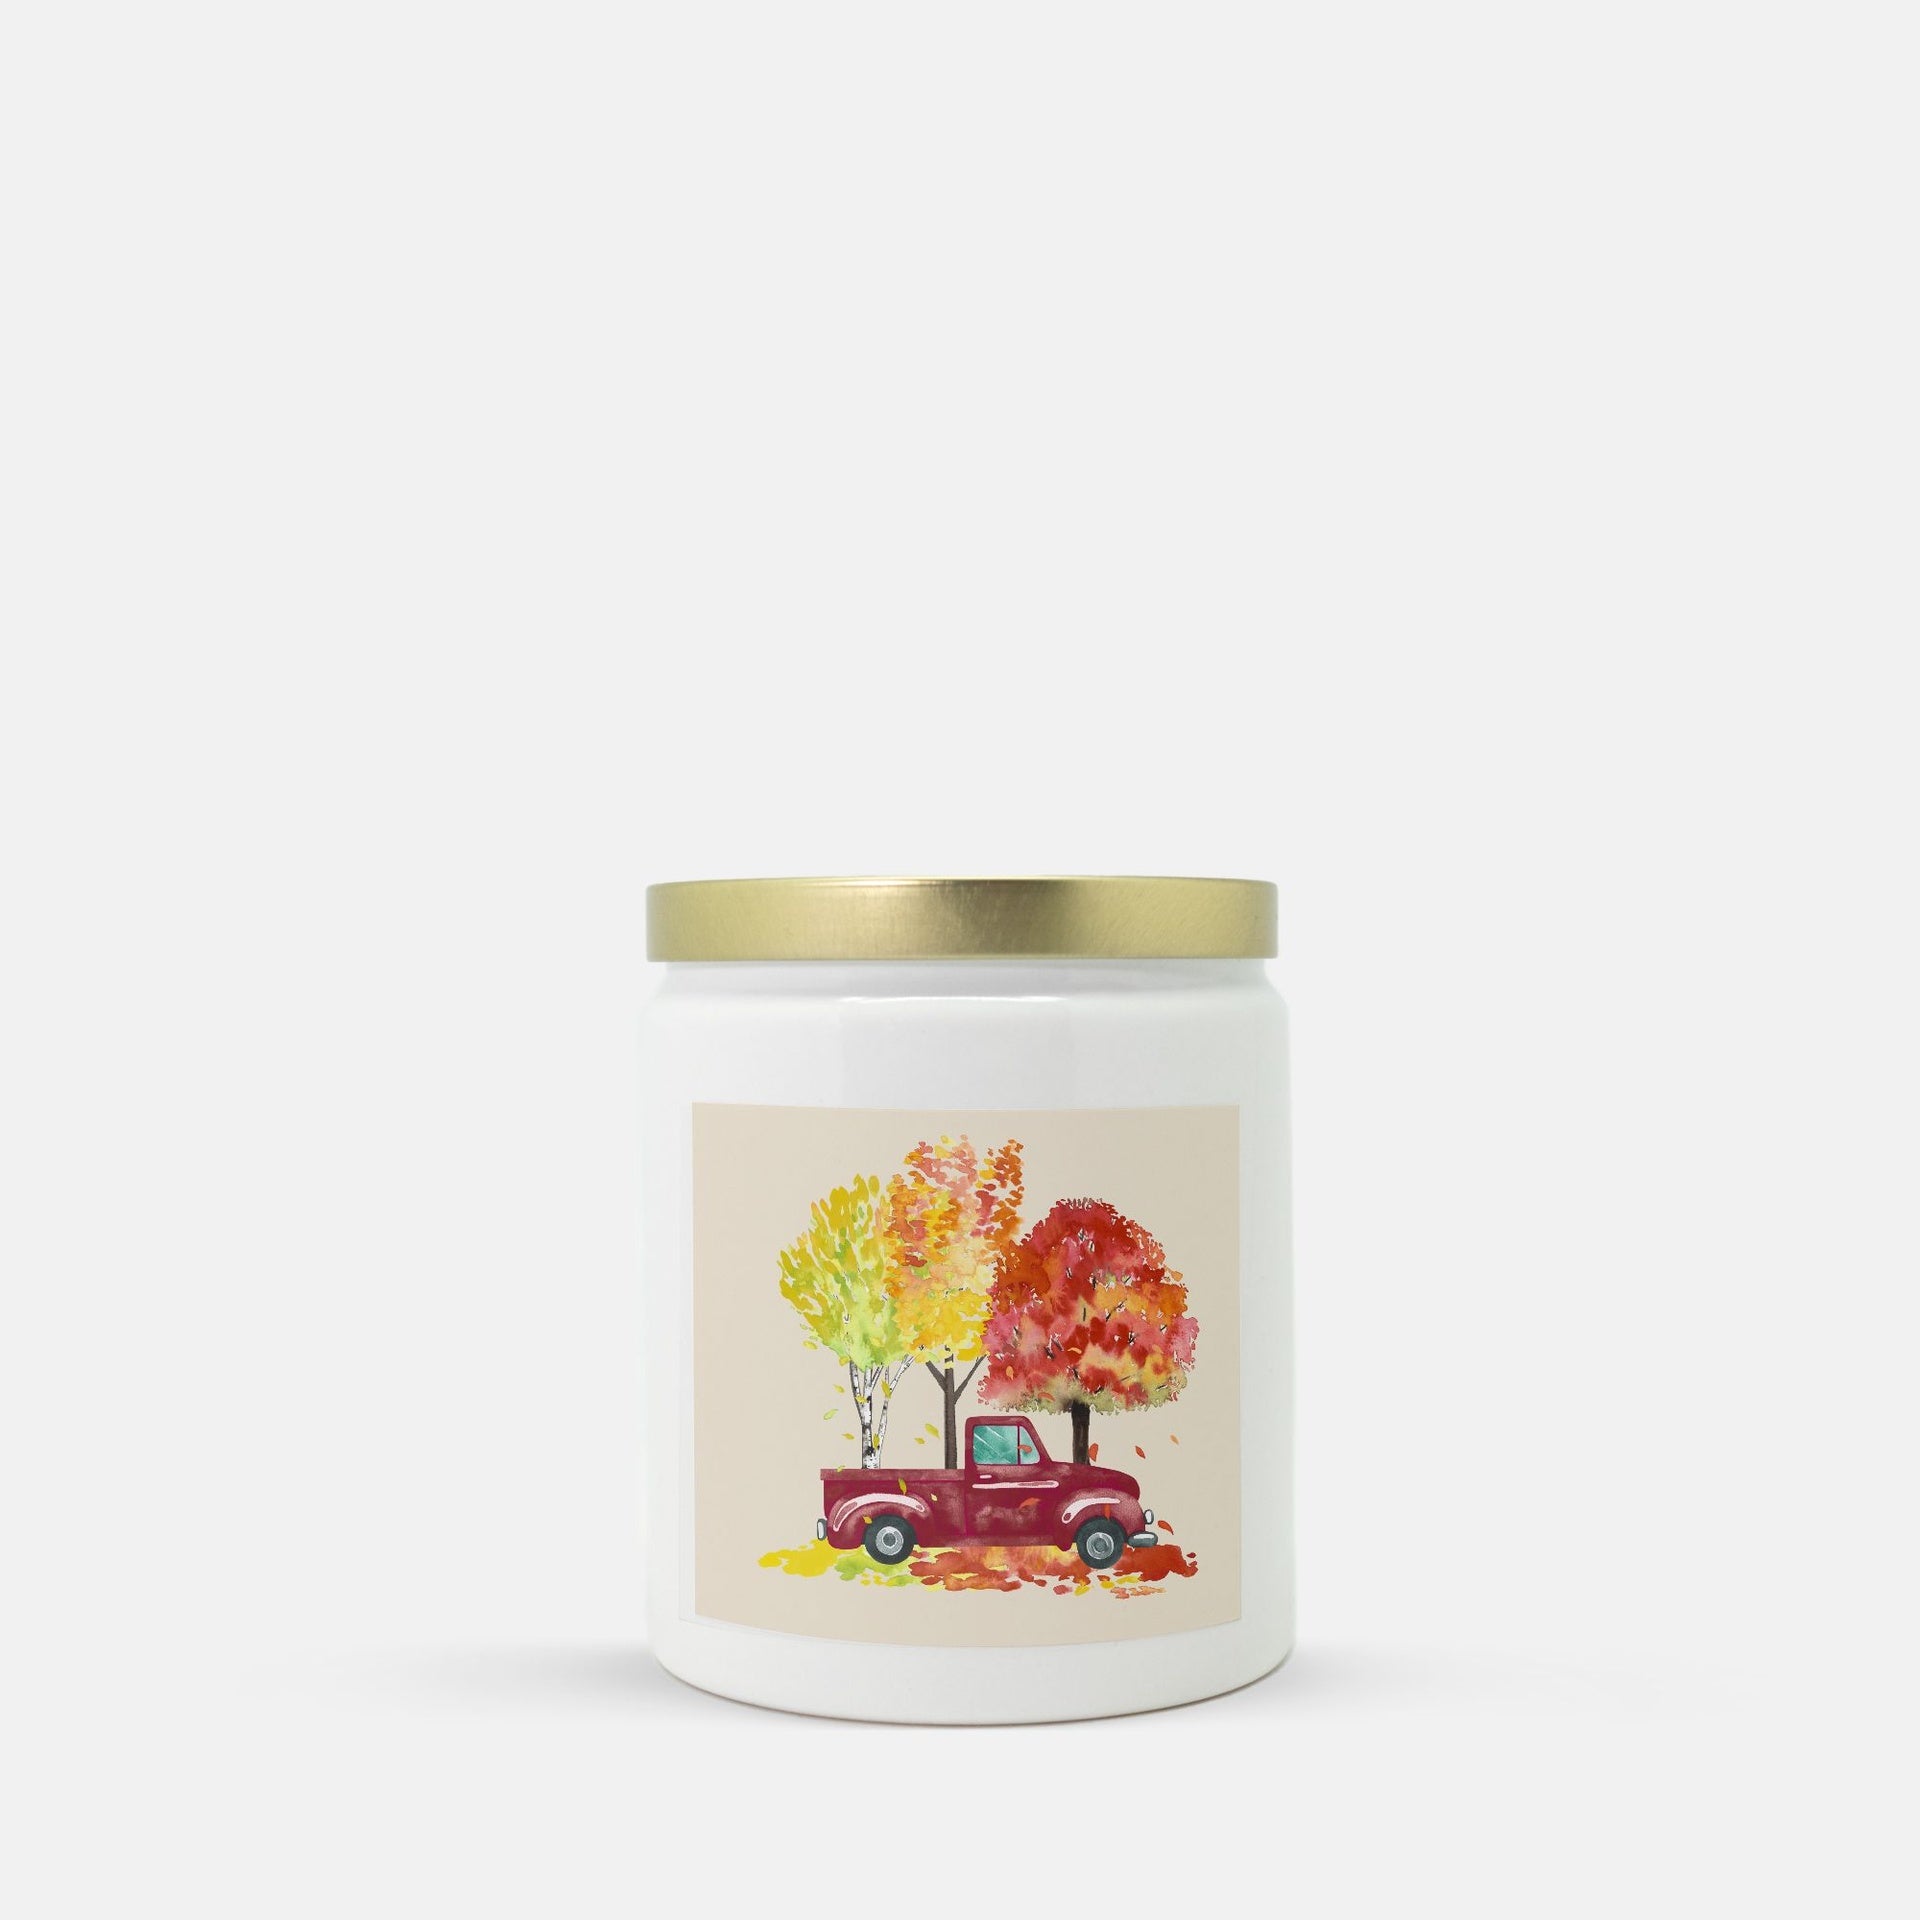 Lifetyle Details - Red Rustic Truck & Trees Ceramic Candle w Gold Lid - Macintosh